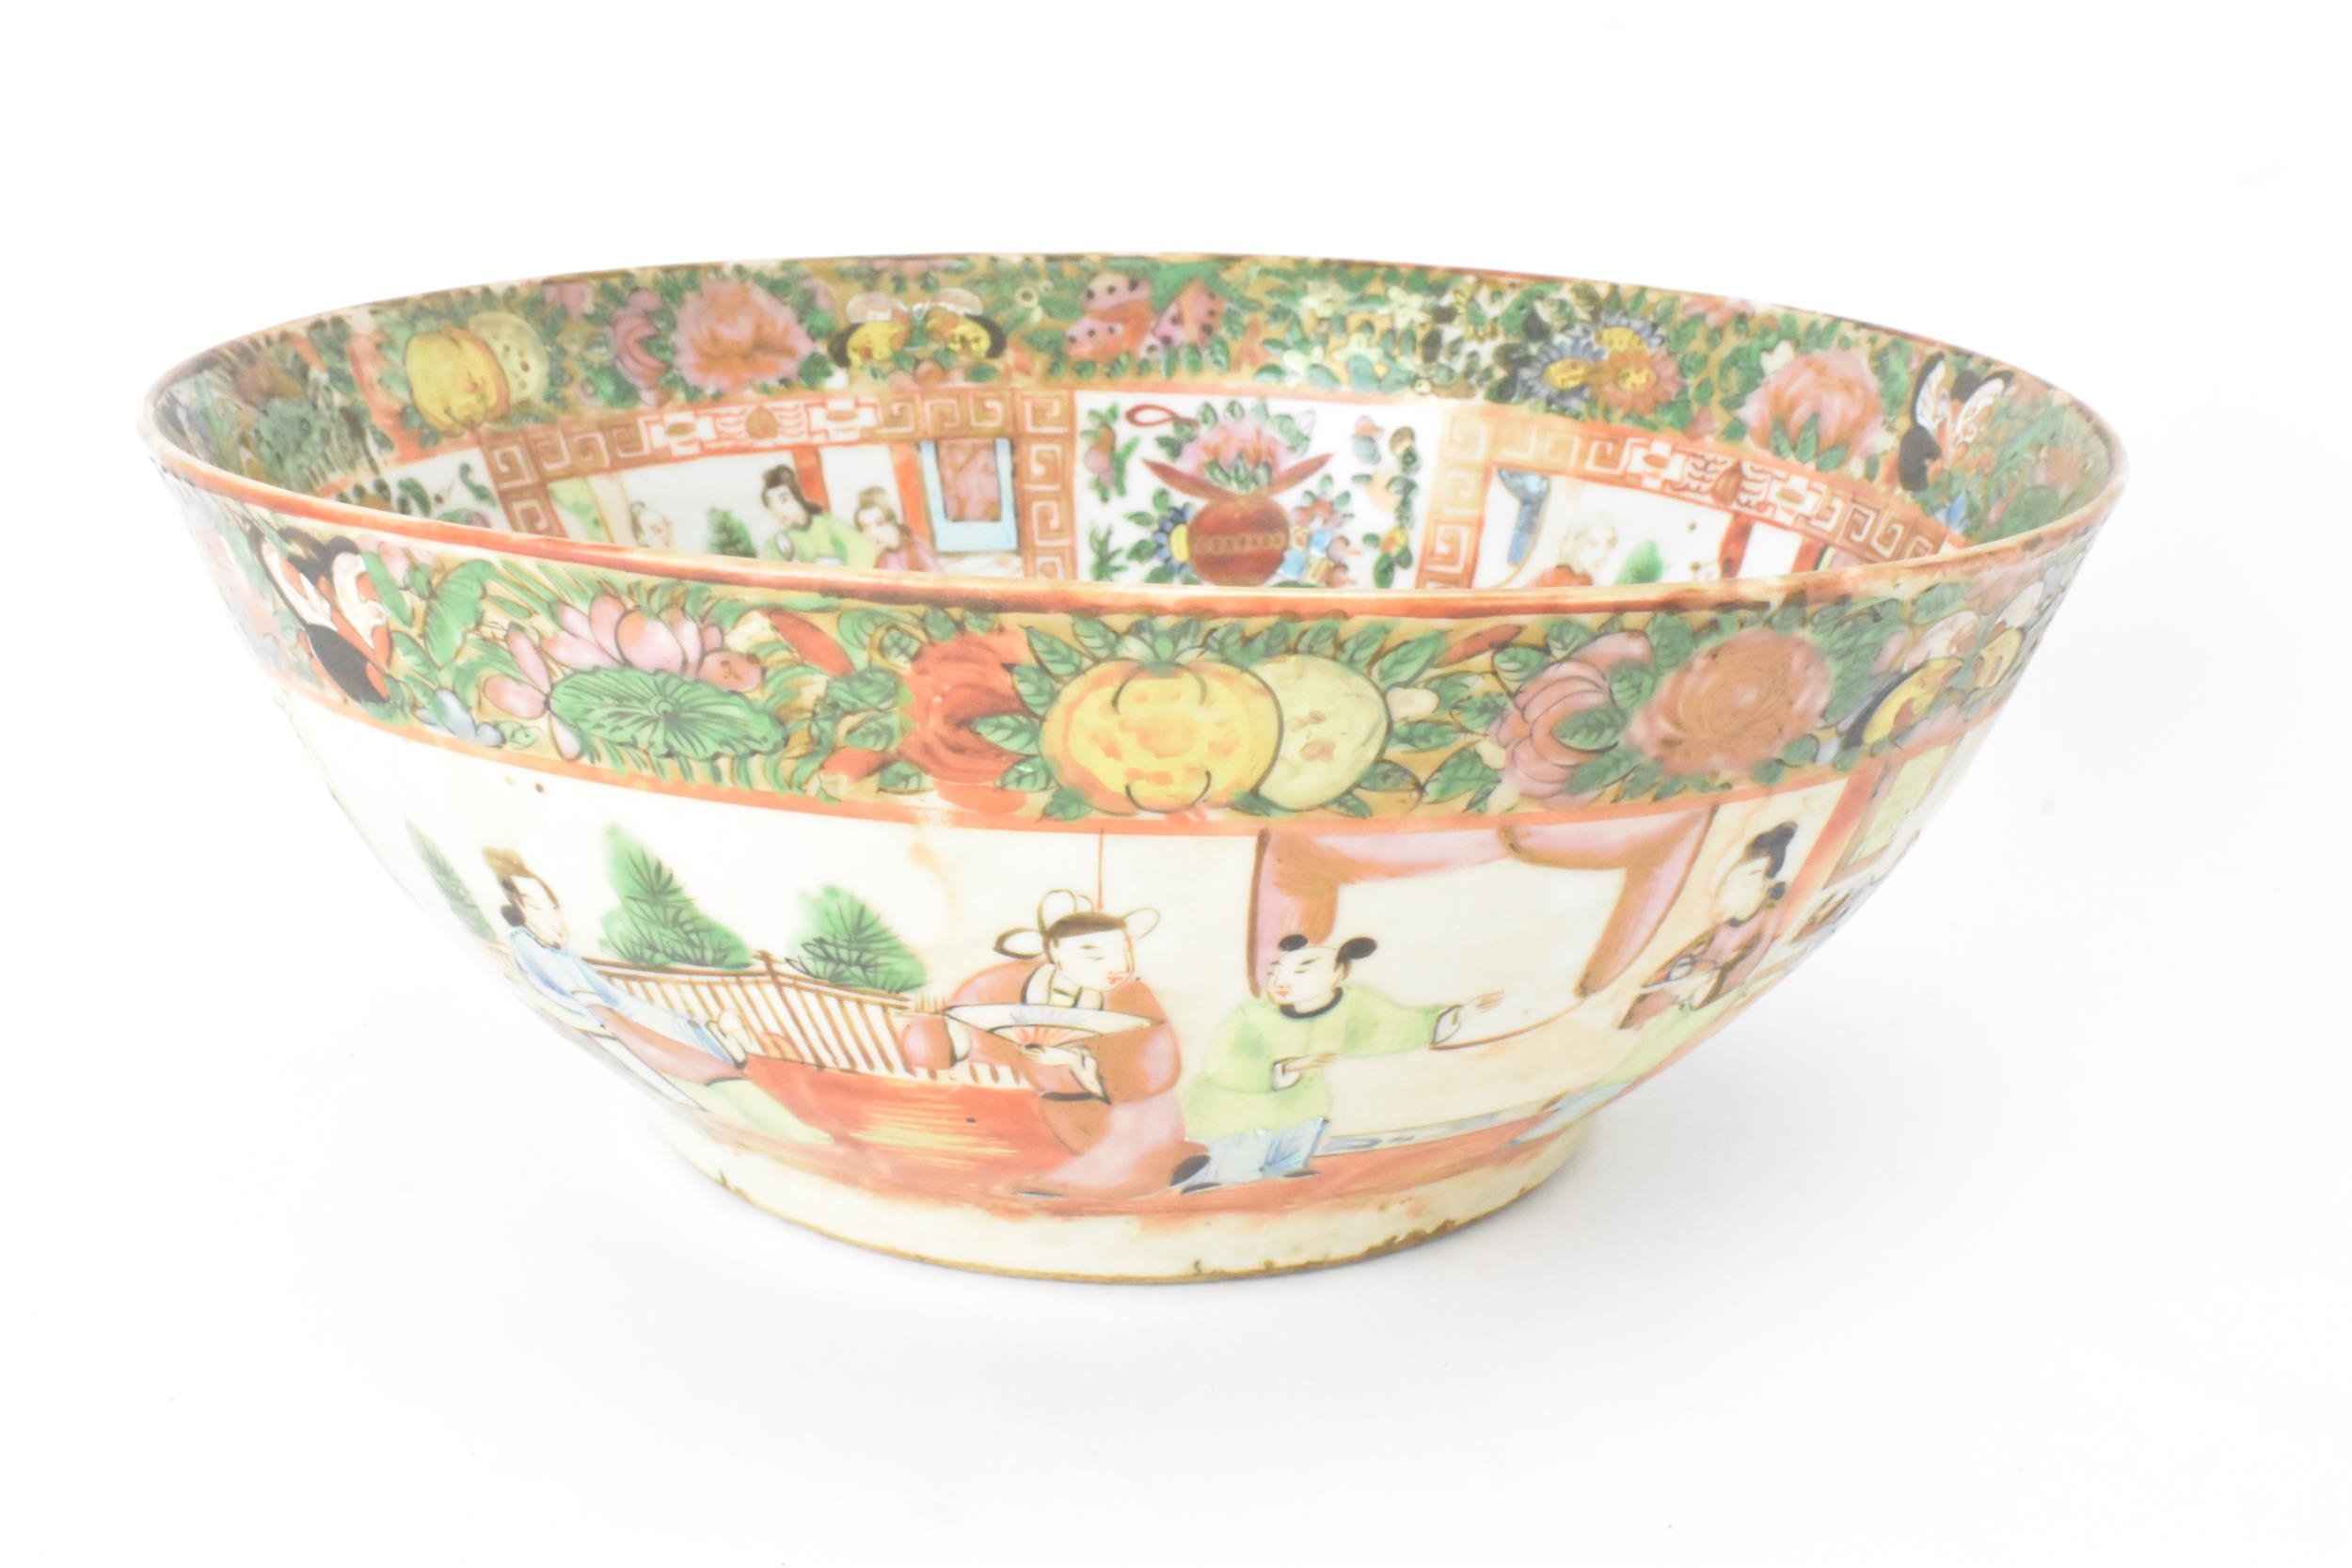 A pair of Chinese export late 19th century Canton Famille Rose porcelain bowls, in polychrome - Image 10 of 12